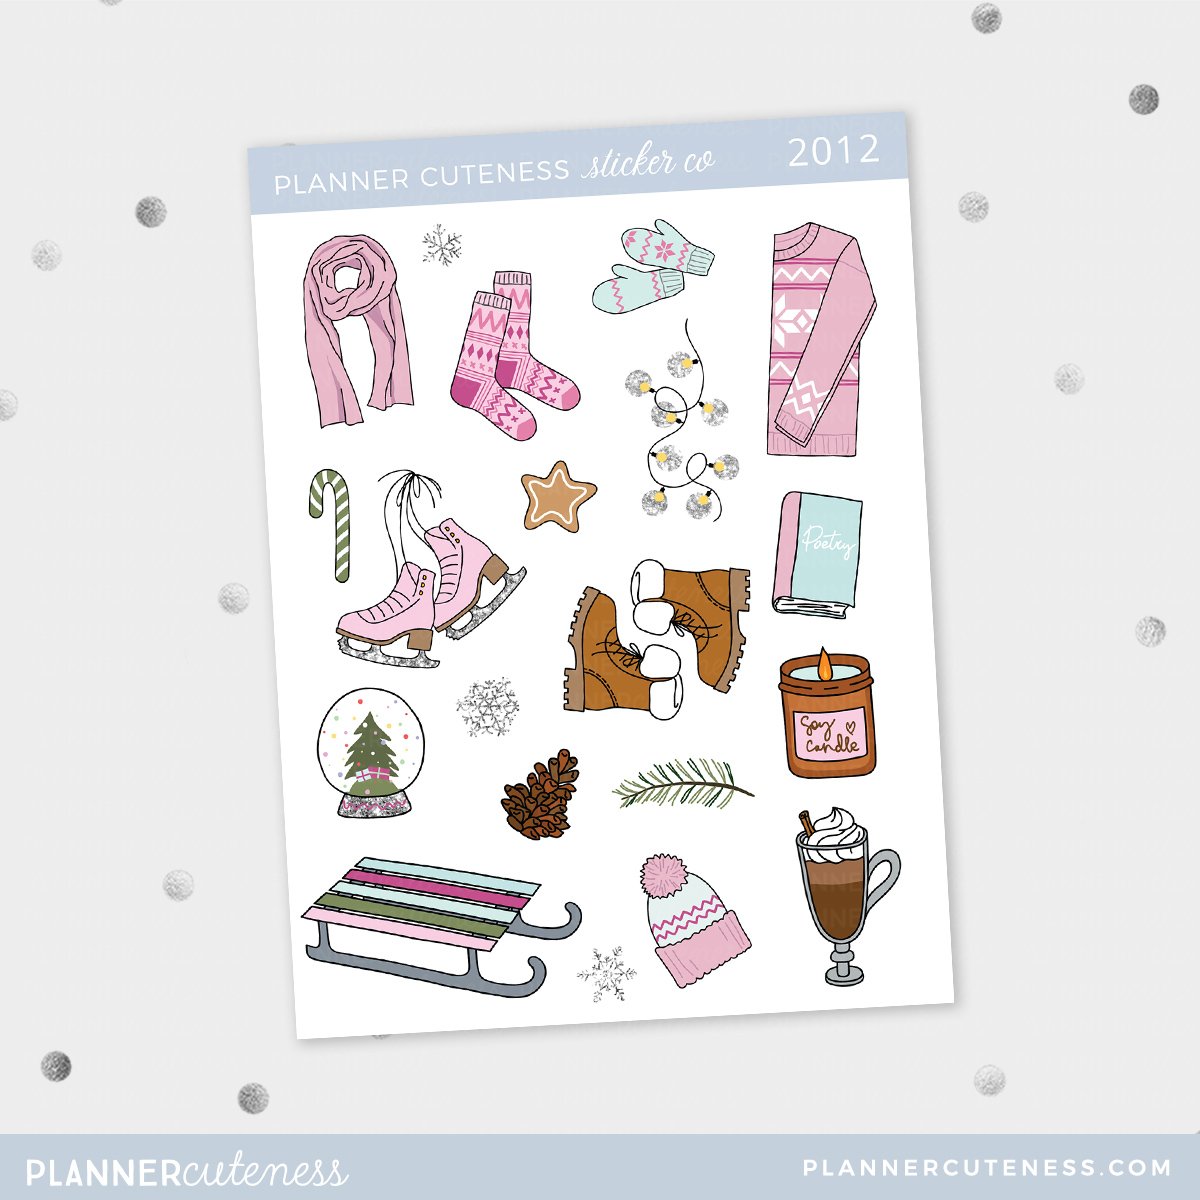 🎄Its never too early to start prepping for a pink christmas. 🎄
#PlannerStickers #PlannerCommunity